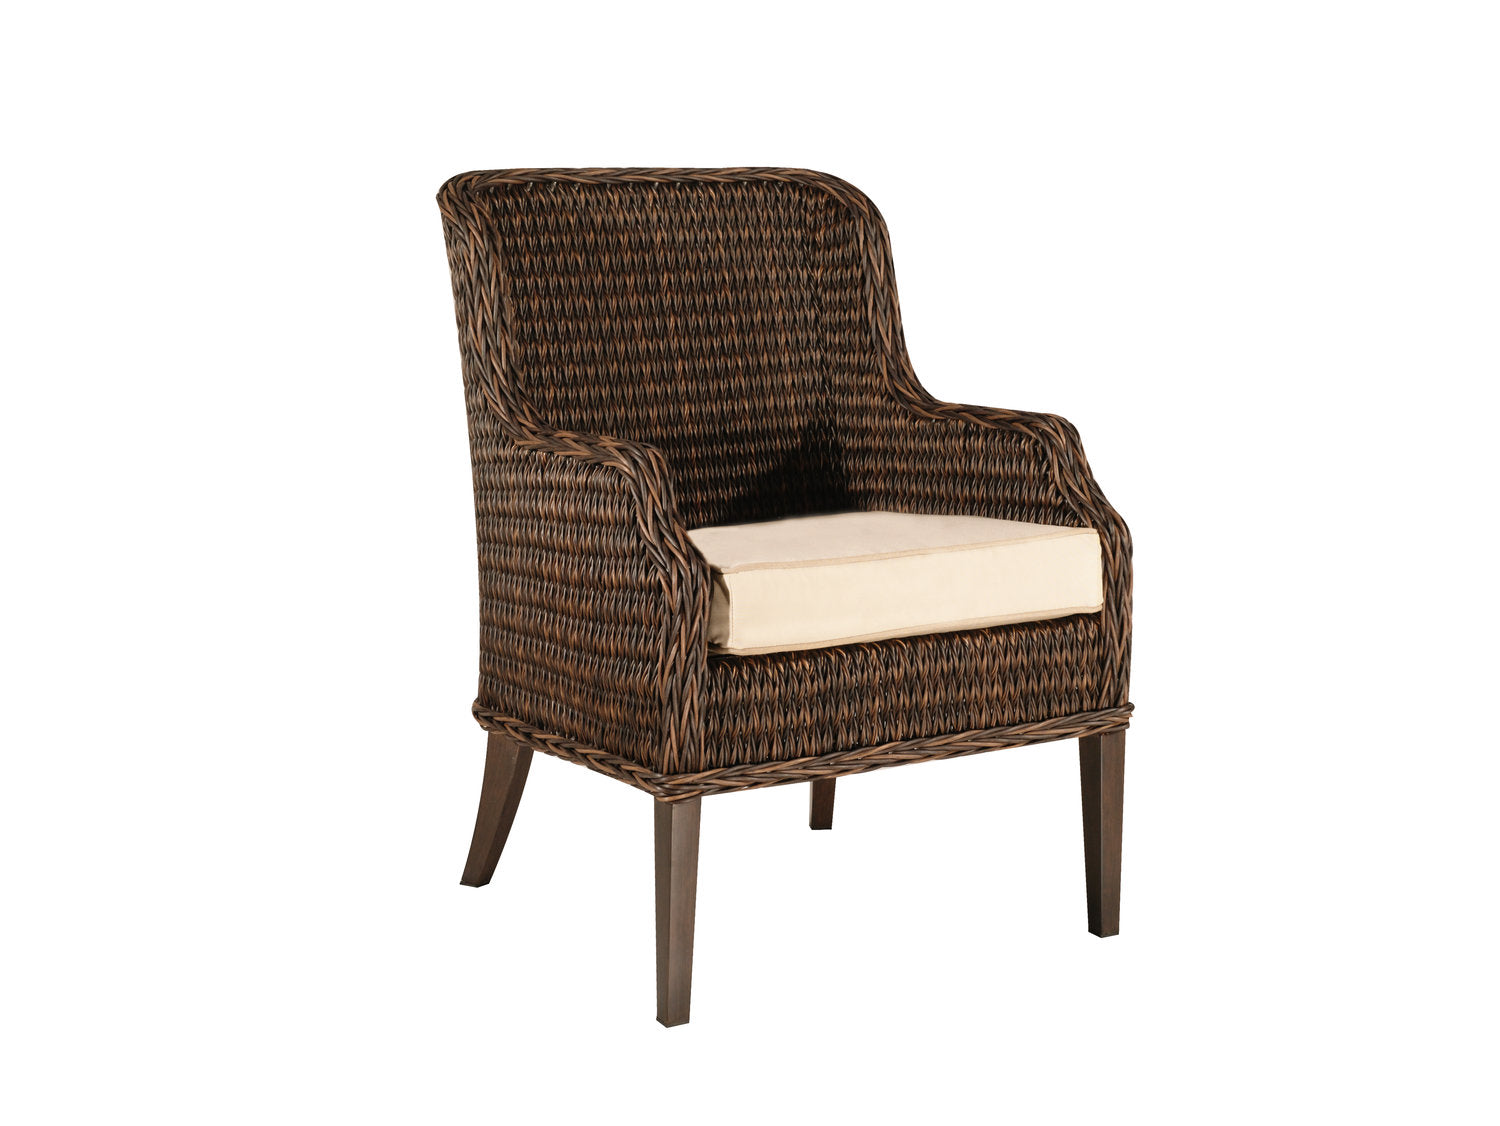 Monticello Dining Chair By Patio Renaissance